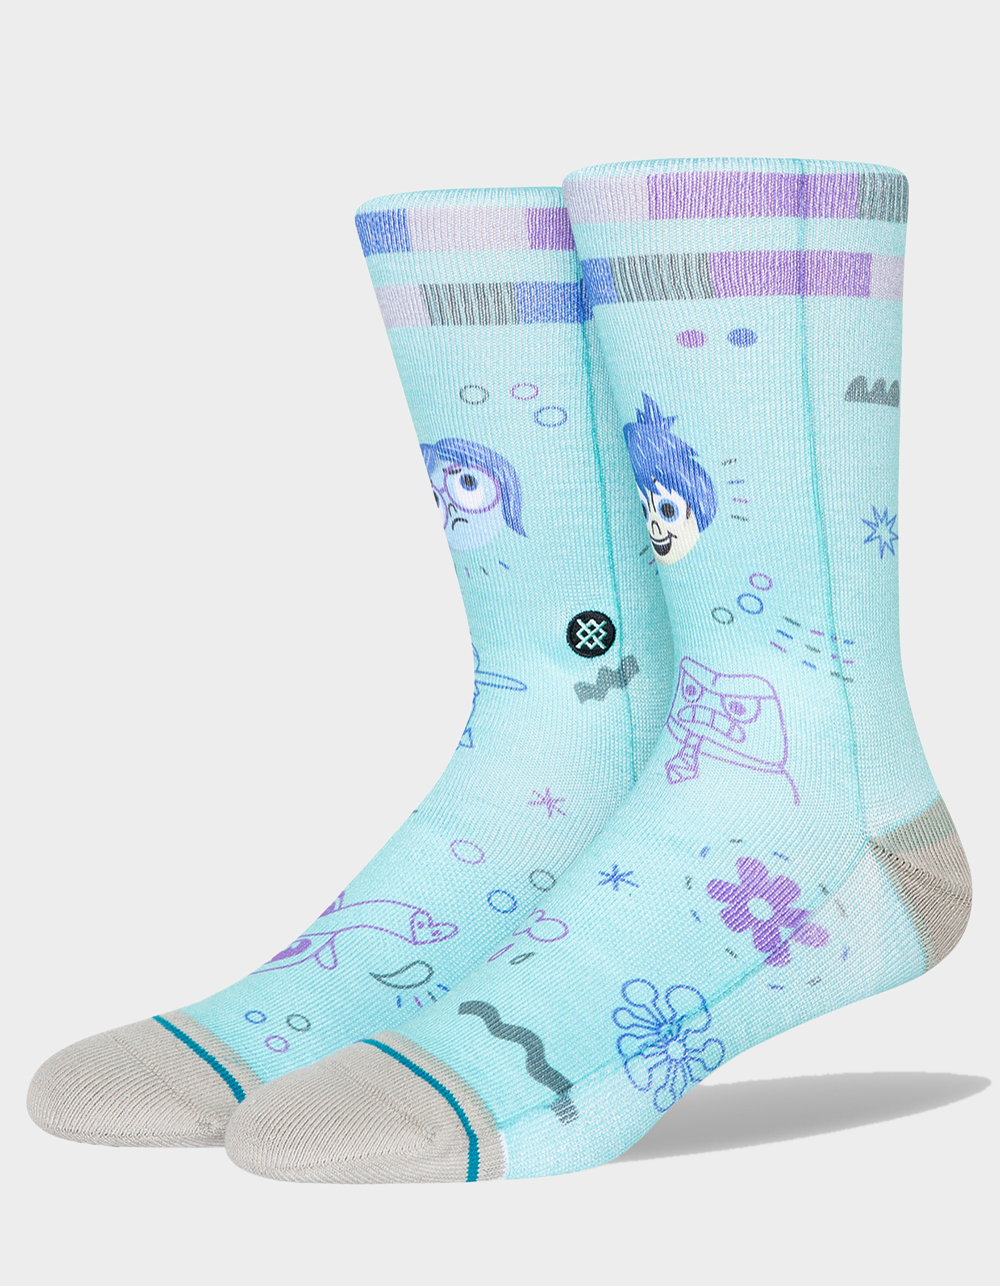 STANCE x Pixar Inside Out By Bubnis Mens Crew Socks